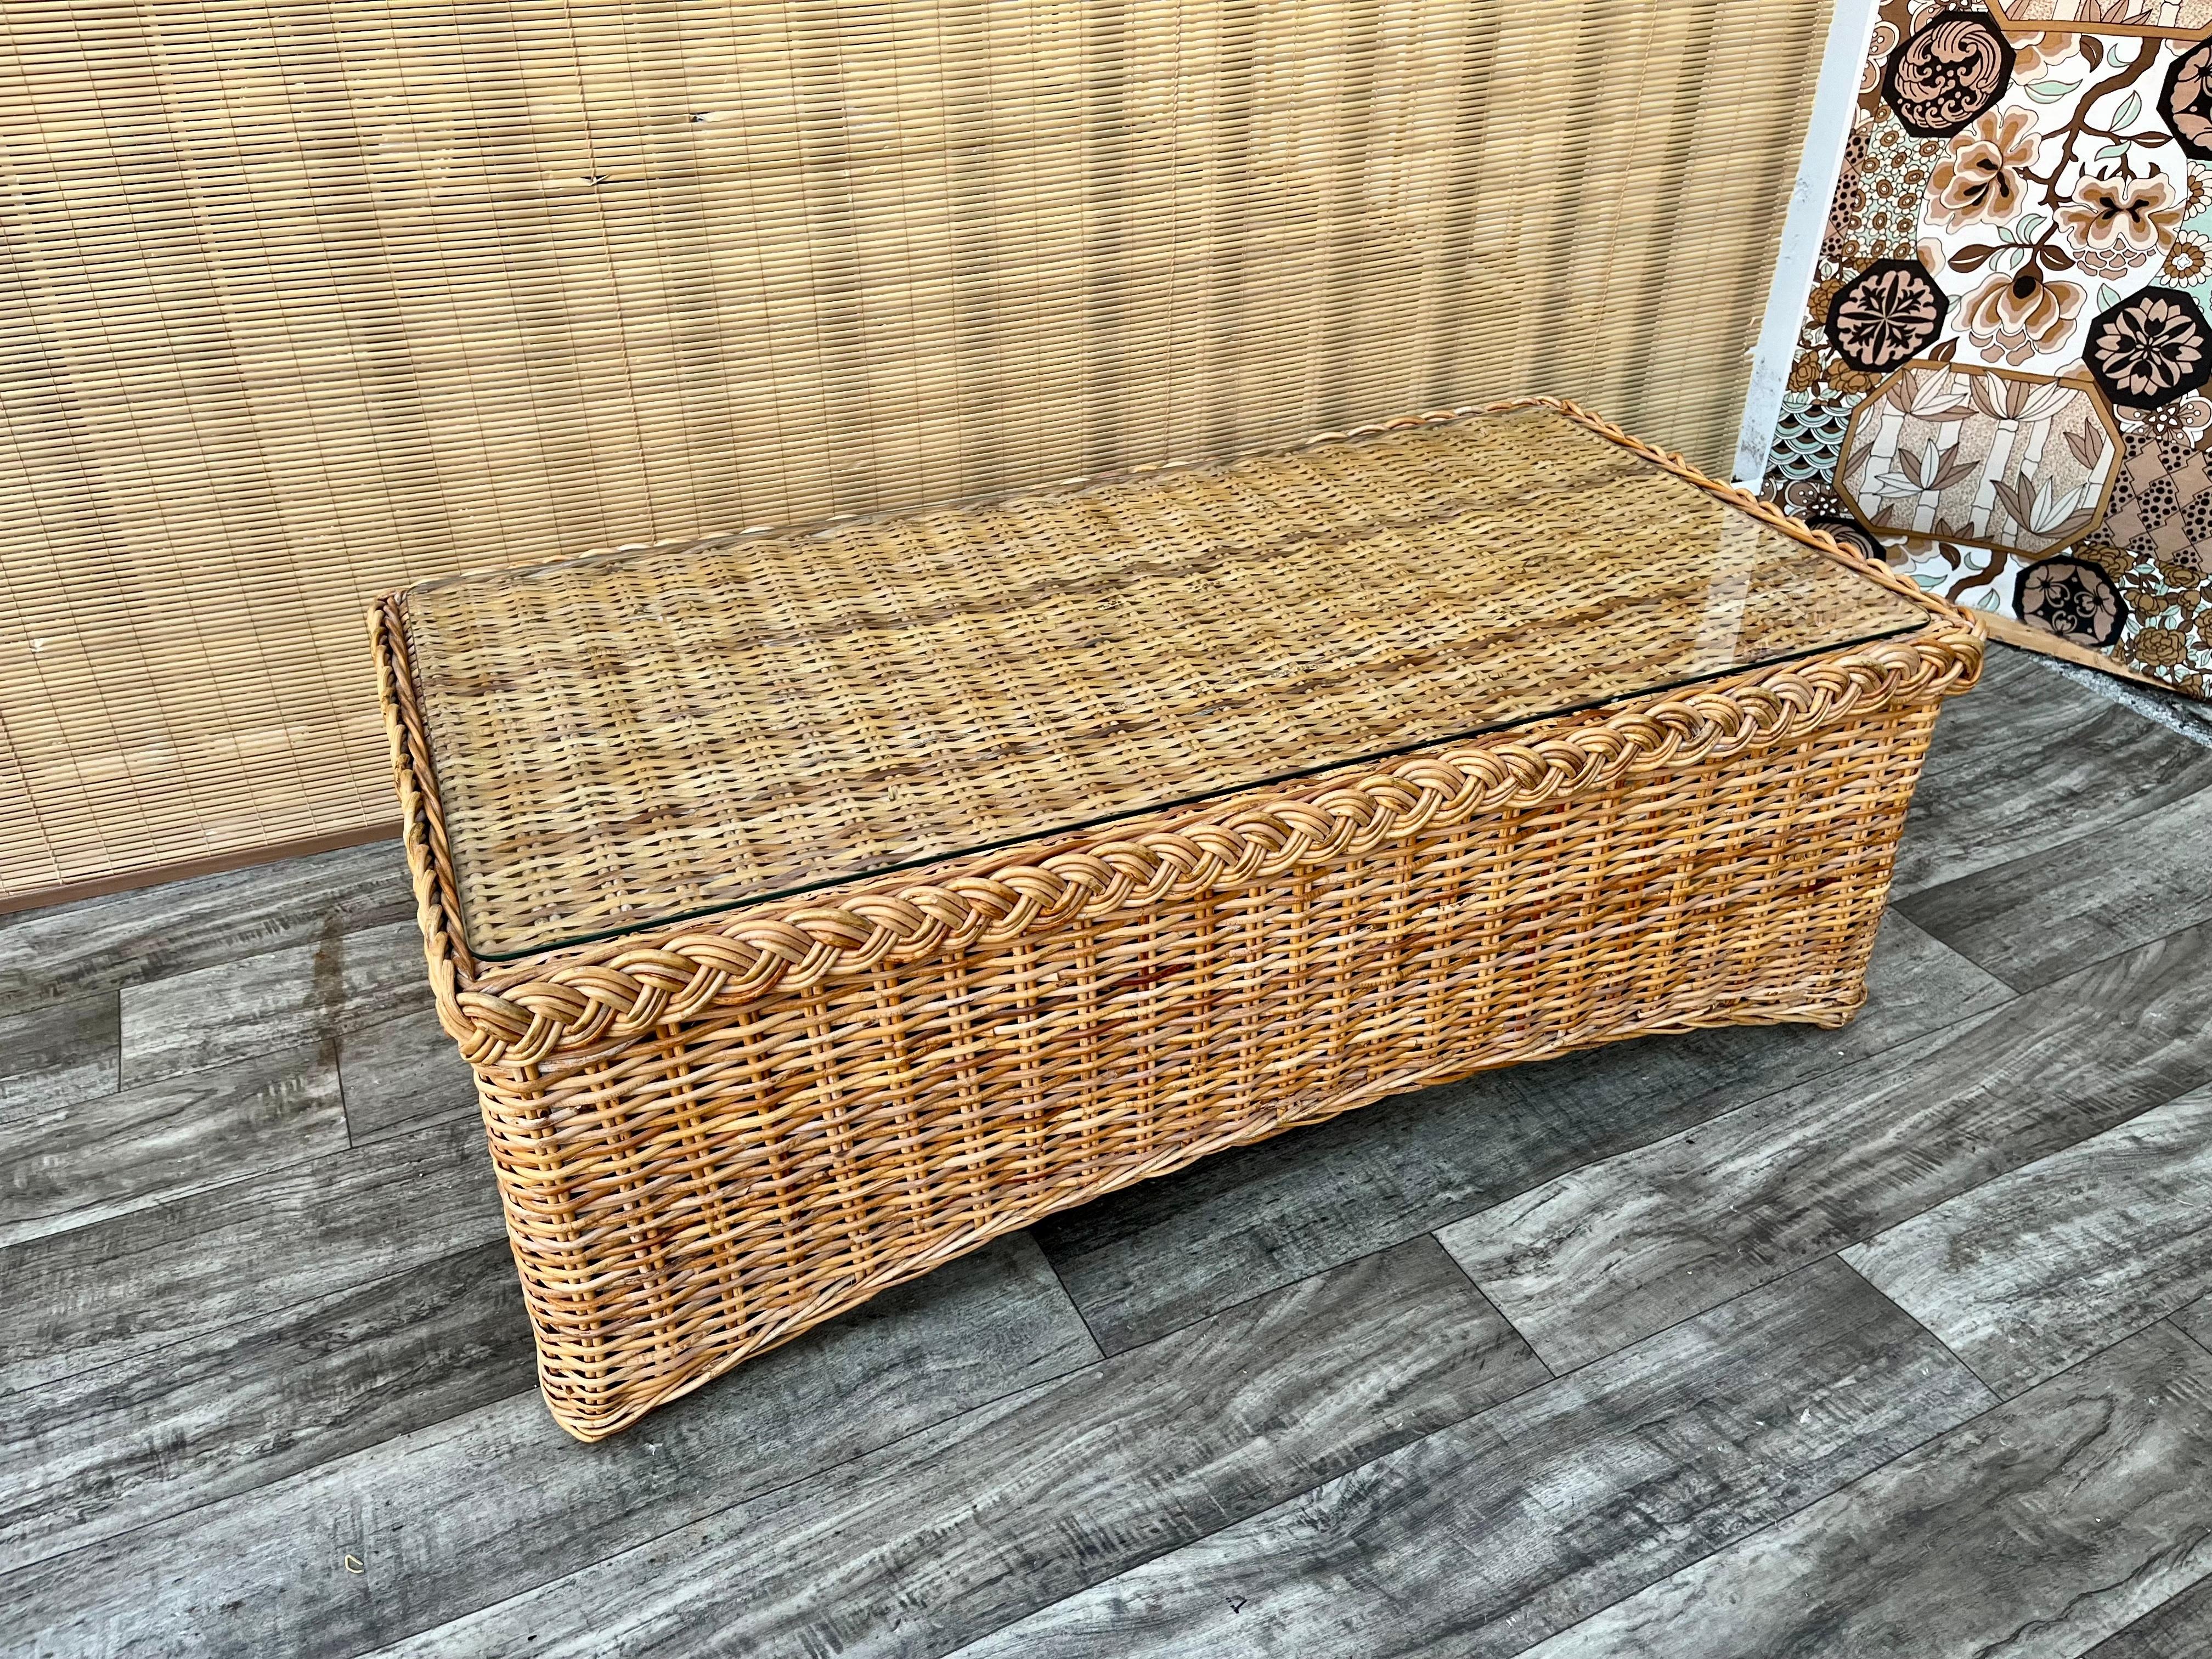  Vintage Large Scale, Natural Wicker/Rattan Coastal Style Coffee Table in the Bielecky Brothers' manner. Circa 1970s
Features a beautiful glowing honey colored weaved rattan frame with an elegant braided trim detail at top edges, with a removable